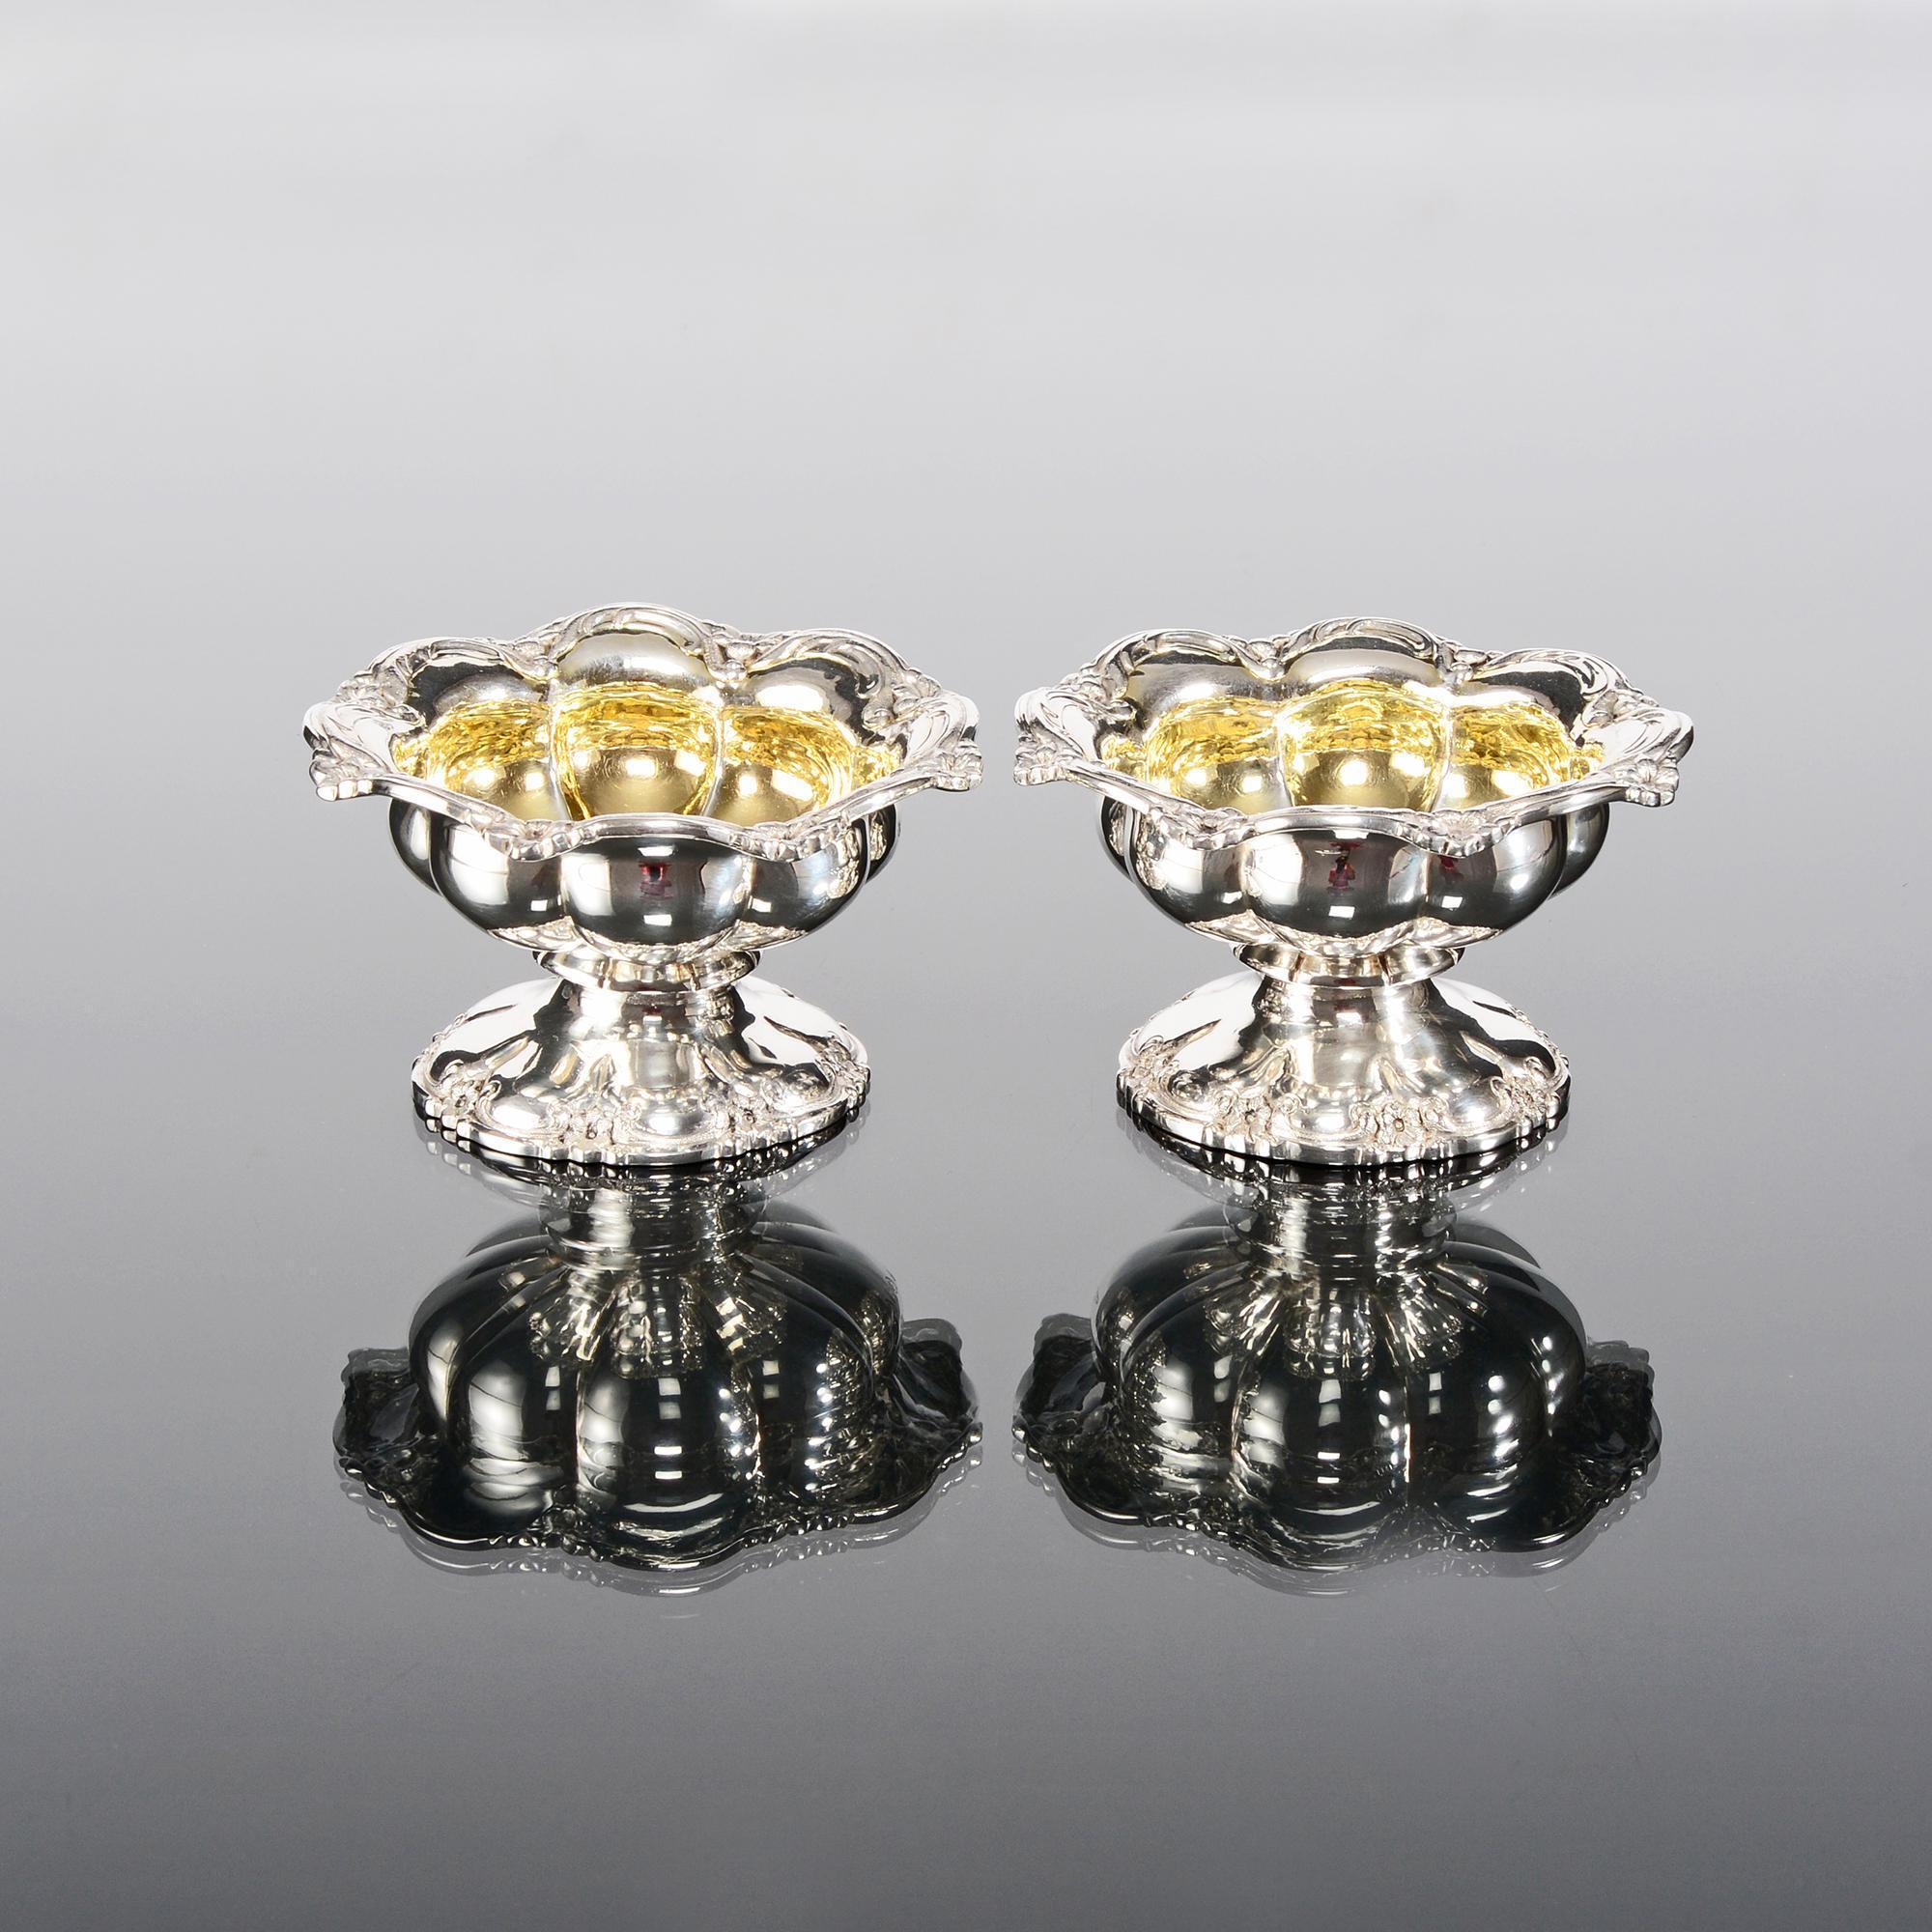 Pair of early Victorian antique silver salt cellars with circular melon fluted bodies, spreading circular bases and decorated with scroll and flowerhead borders. The interiors are beautifully gilded.

Additional information:
Weight 10 troy oz